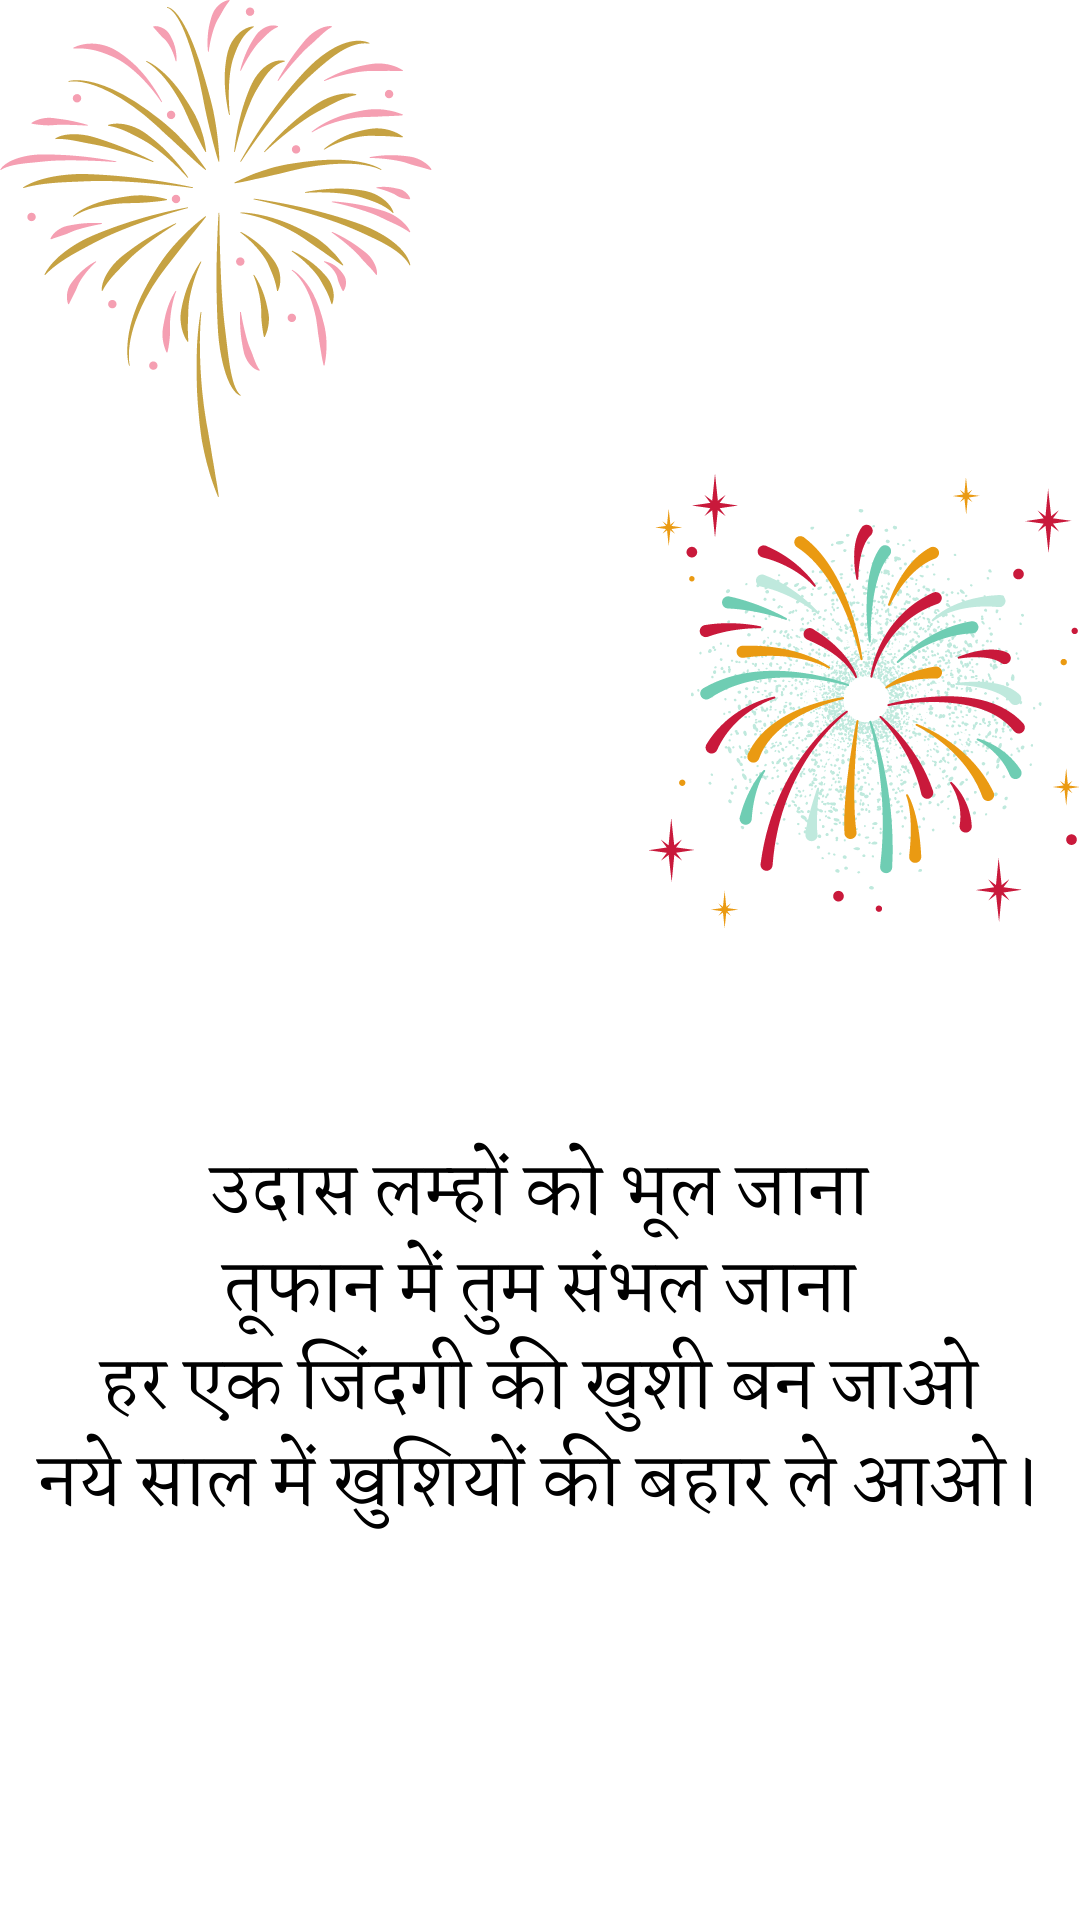 Happy New year 2022 wishes, quotes, slogan, SMS shayari, Status, Facebook Whatsapp Instagram for mother, father, brother, girlfriend, sister, family, everyone, in hindi photos & images